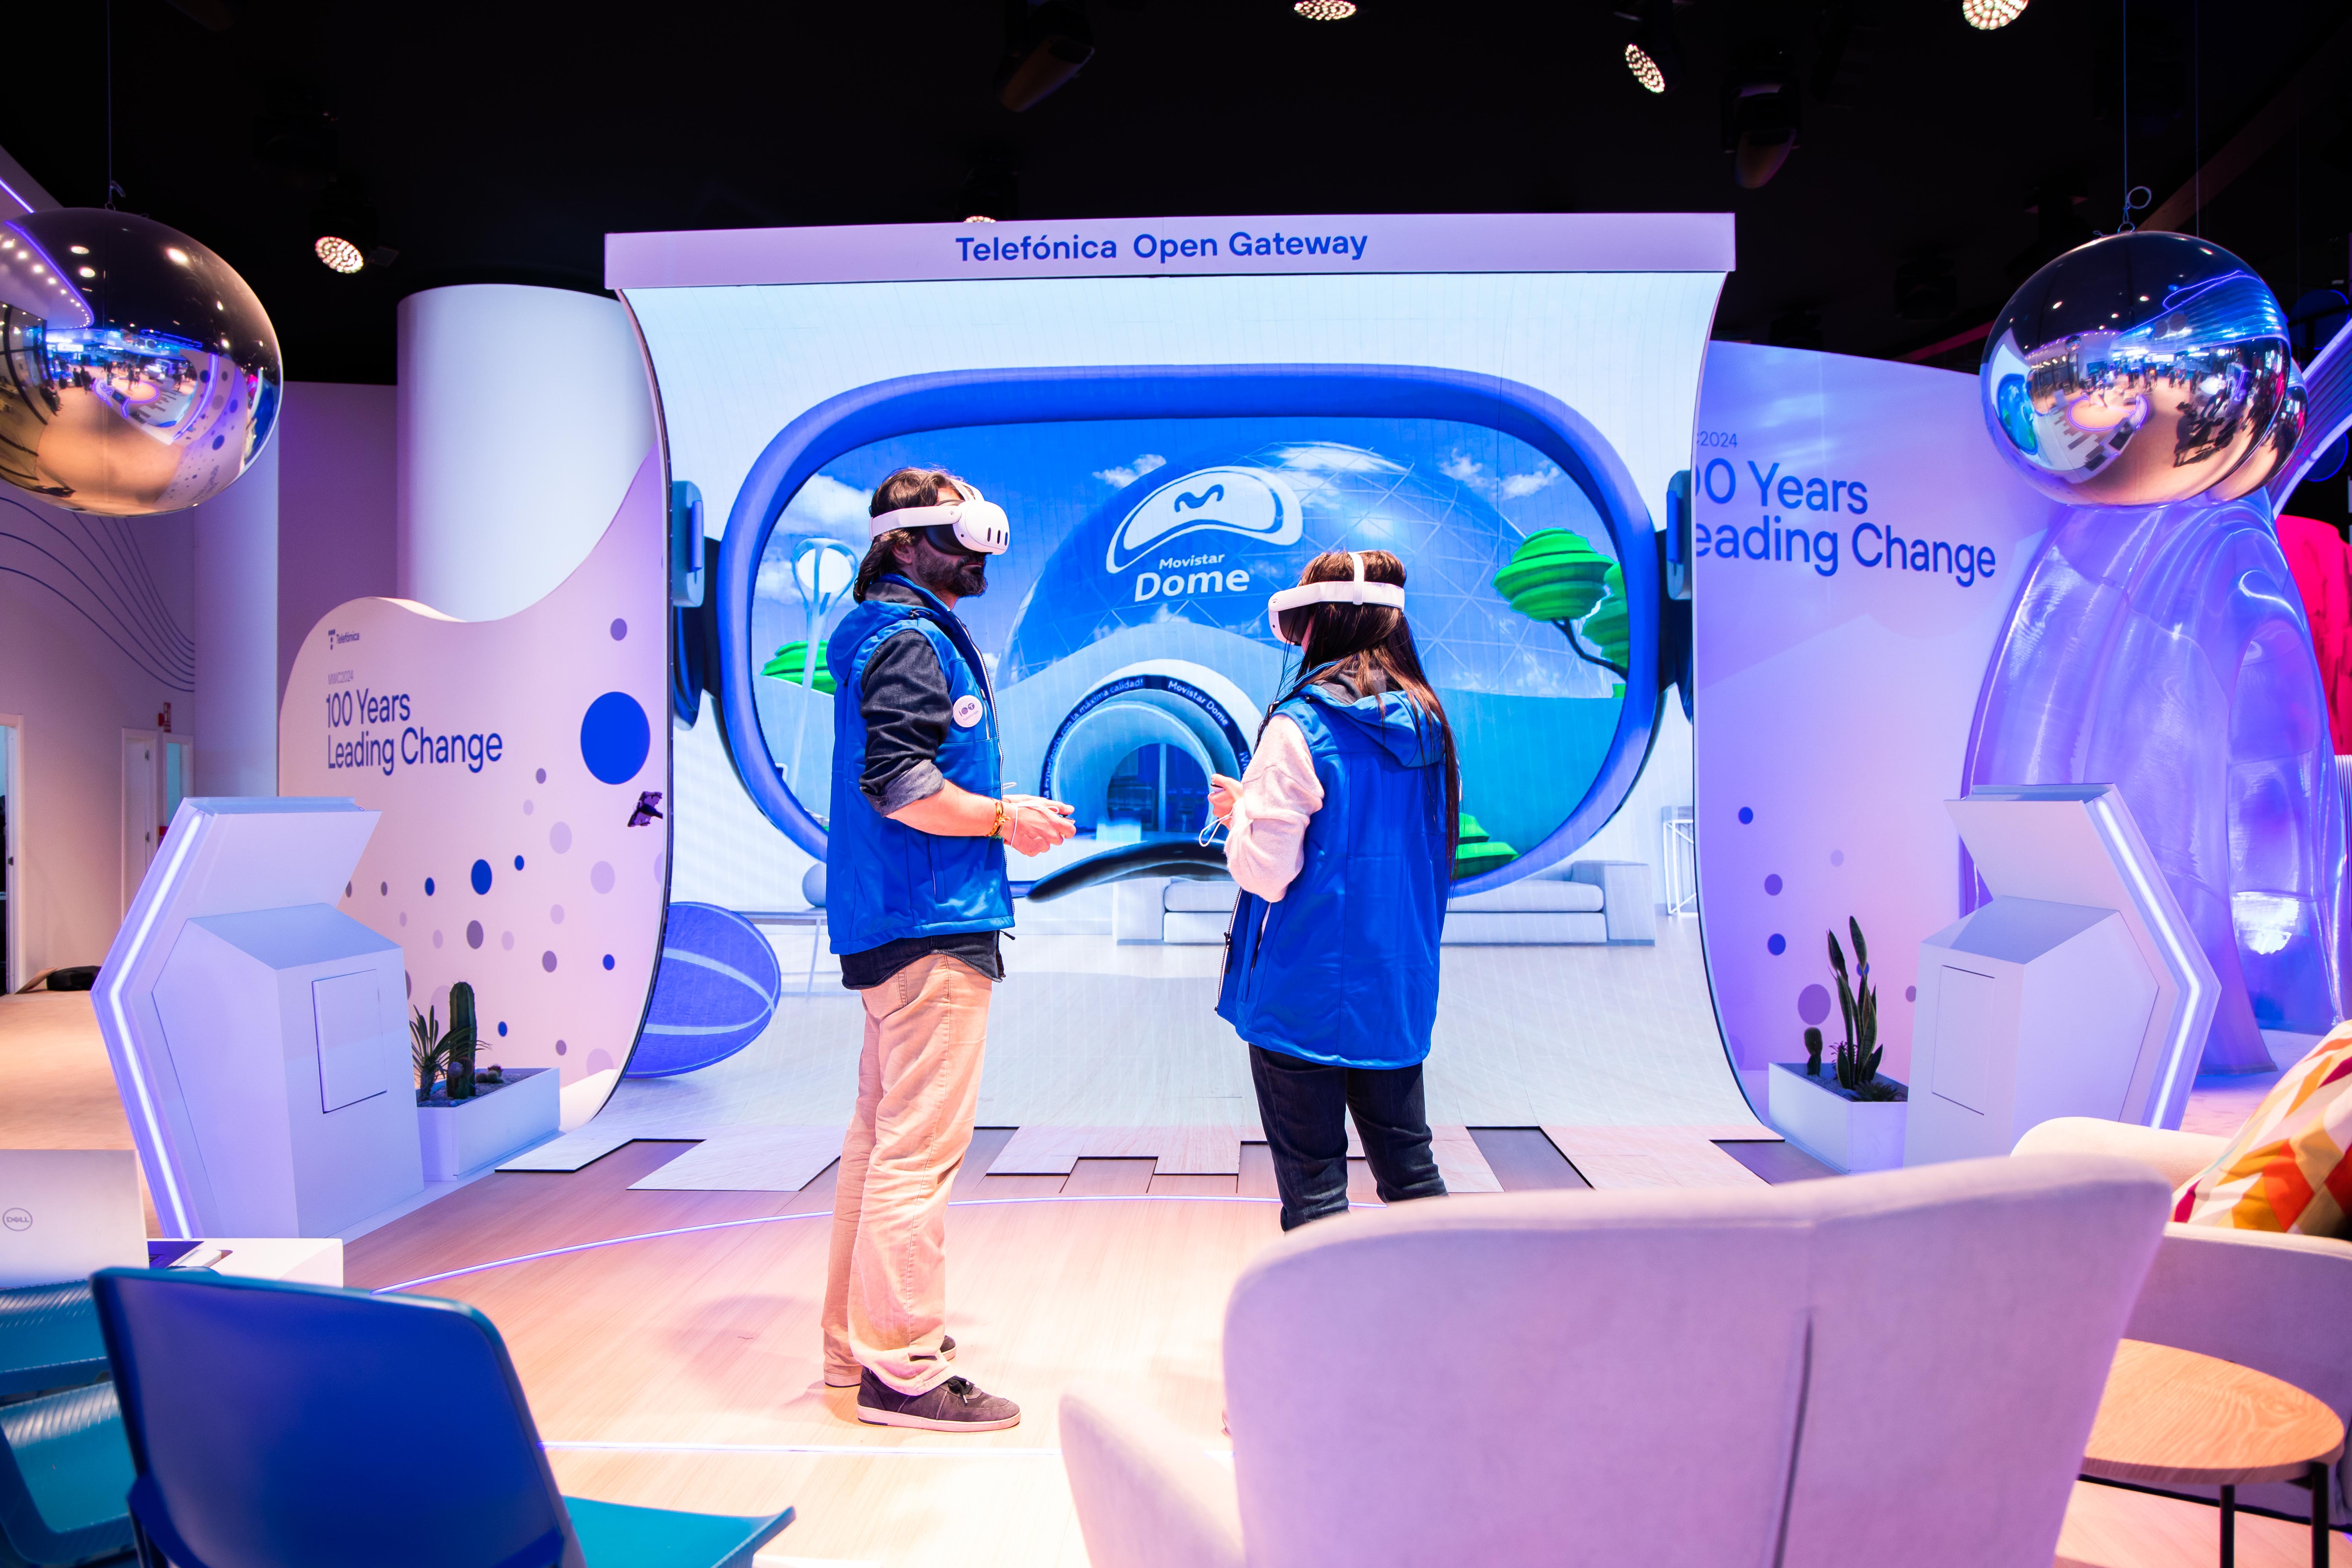 Telefónica's pavilion is divided into three demo areas dedicated to showcasing connectivity, where open networks are key to fostering innovation and driving profitable and sustainable growth, solutions and services for digitised industry, and entertainment that unites the real and virtual worlds.